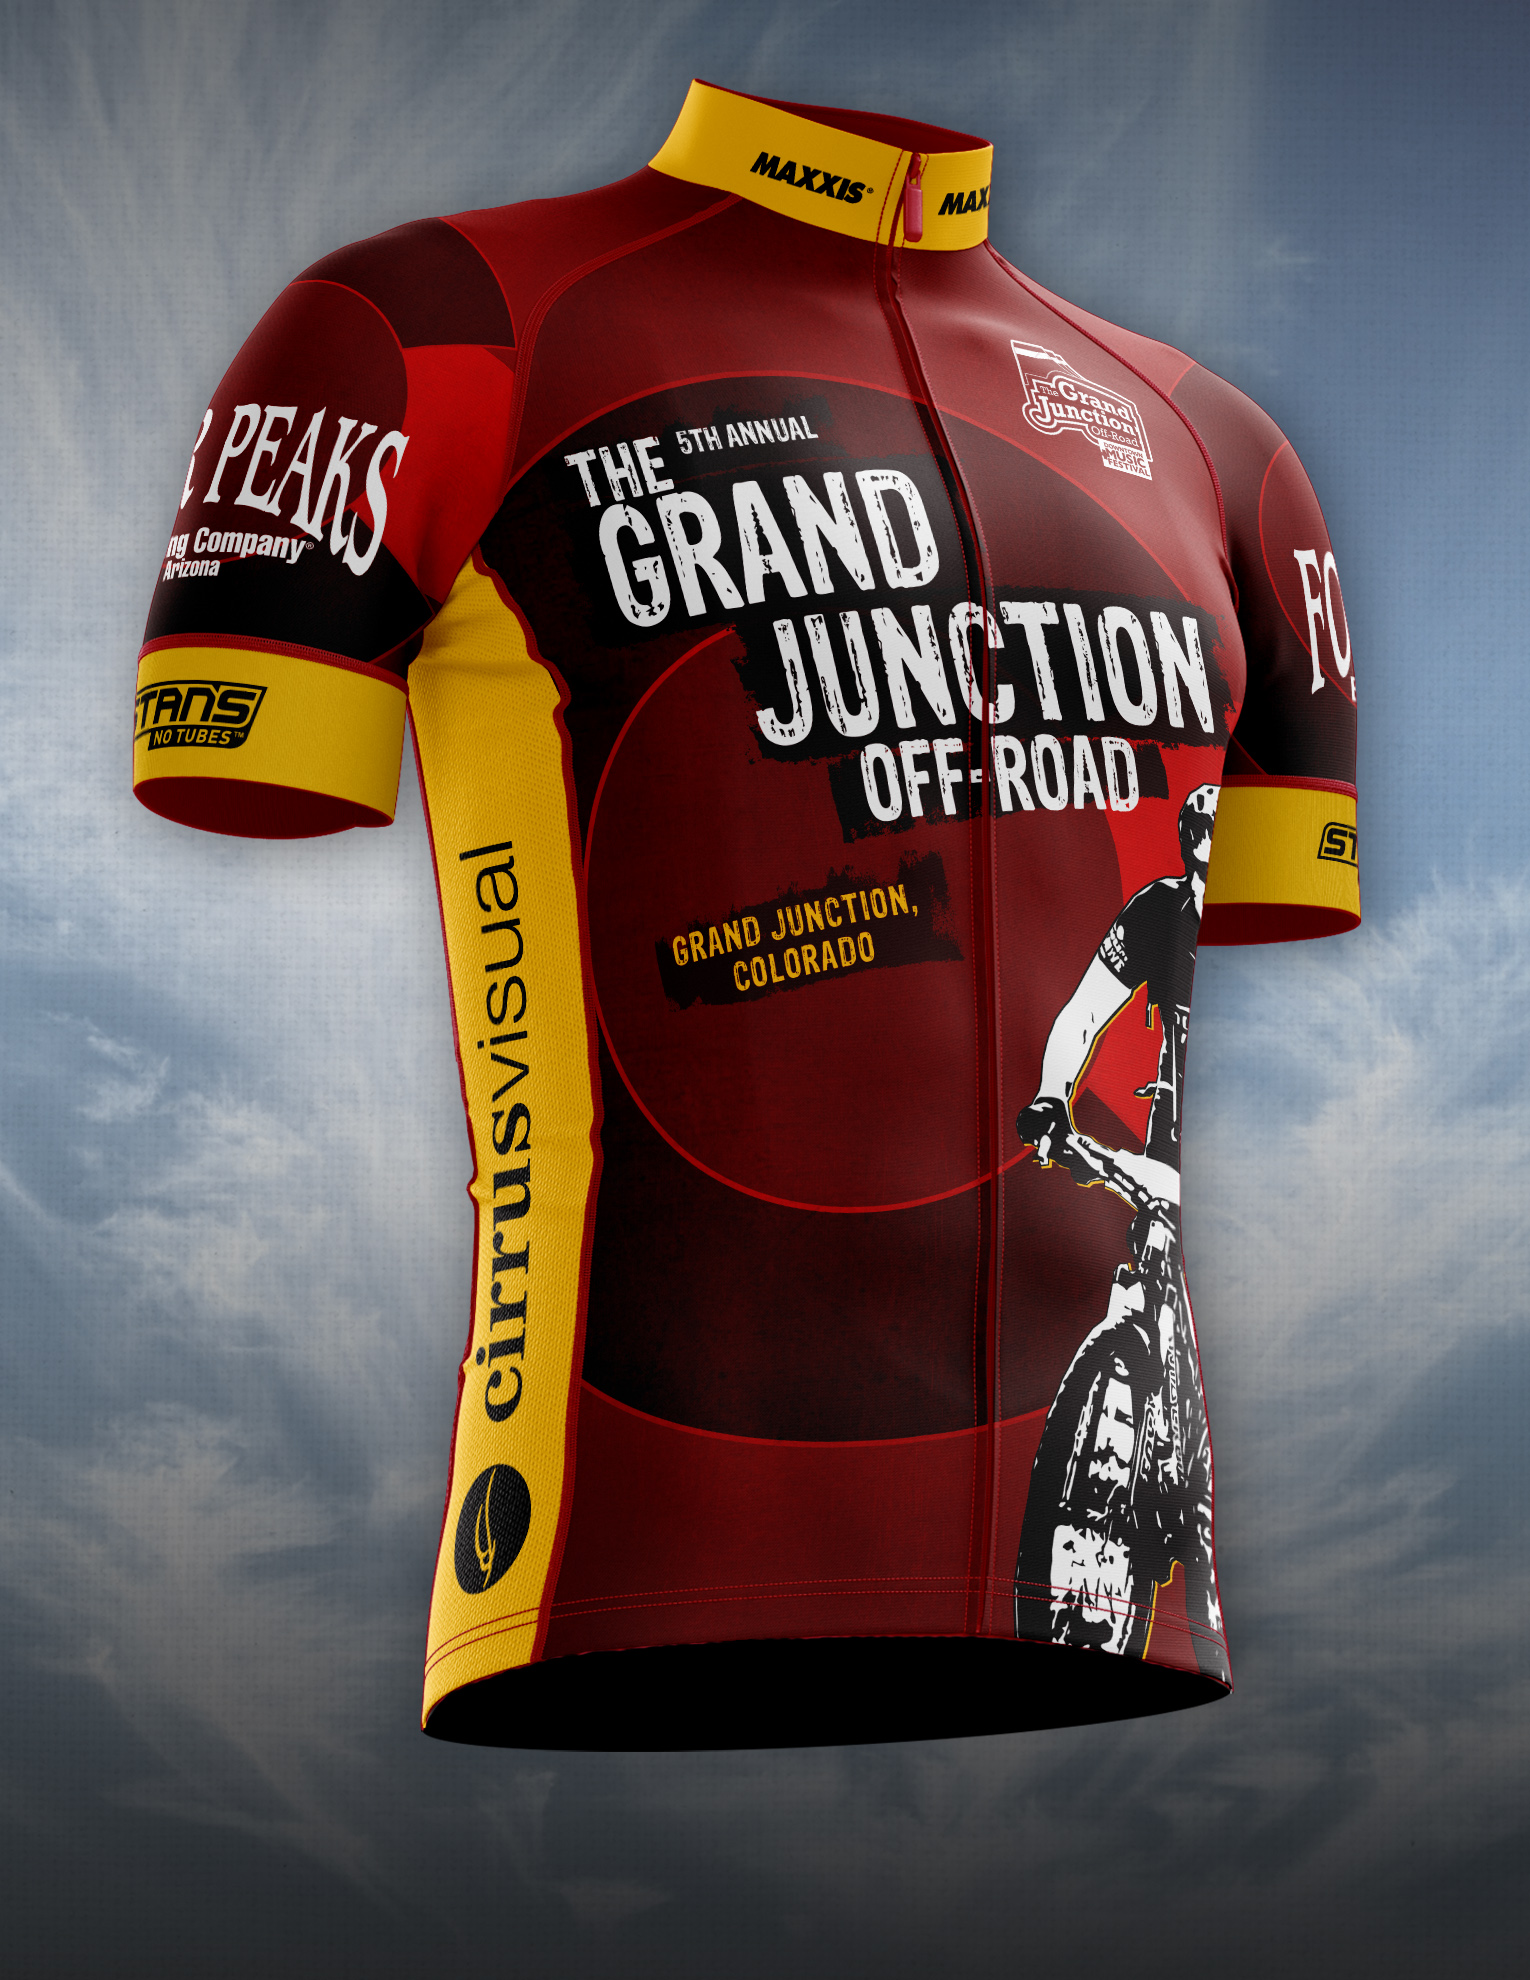 Download Grand Junction Off-Road Jersey - 2017 | Epic Rides ...a ...